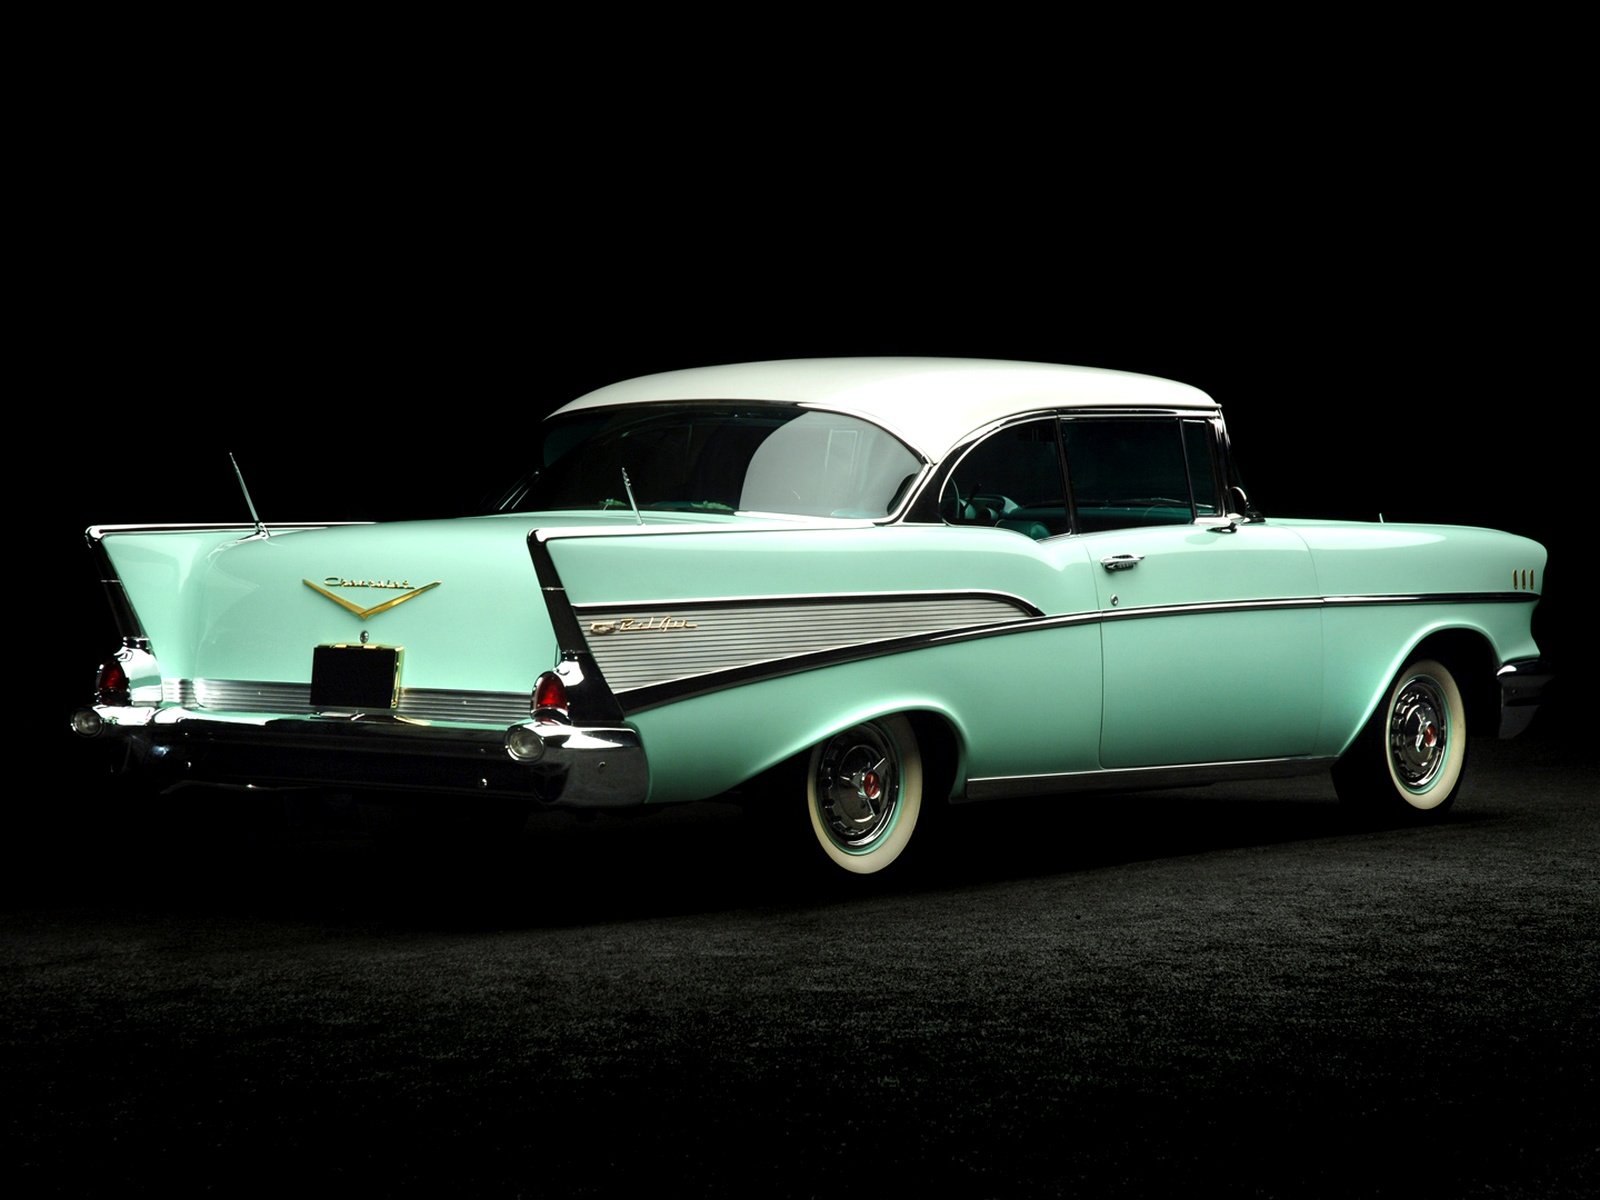 1957, Chevrolet, Bel, Air, Sport, Coupe, Cars, Classic